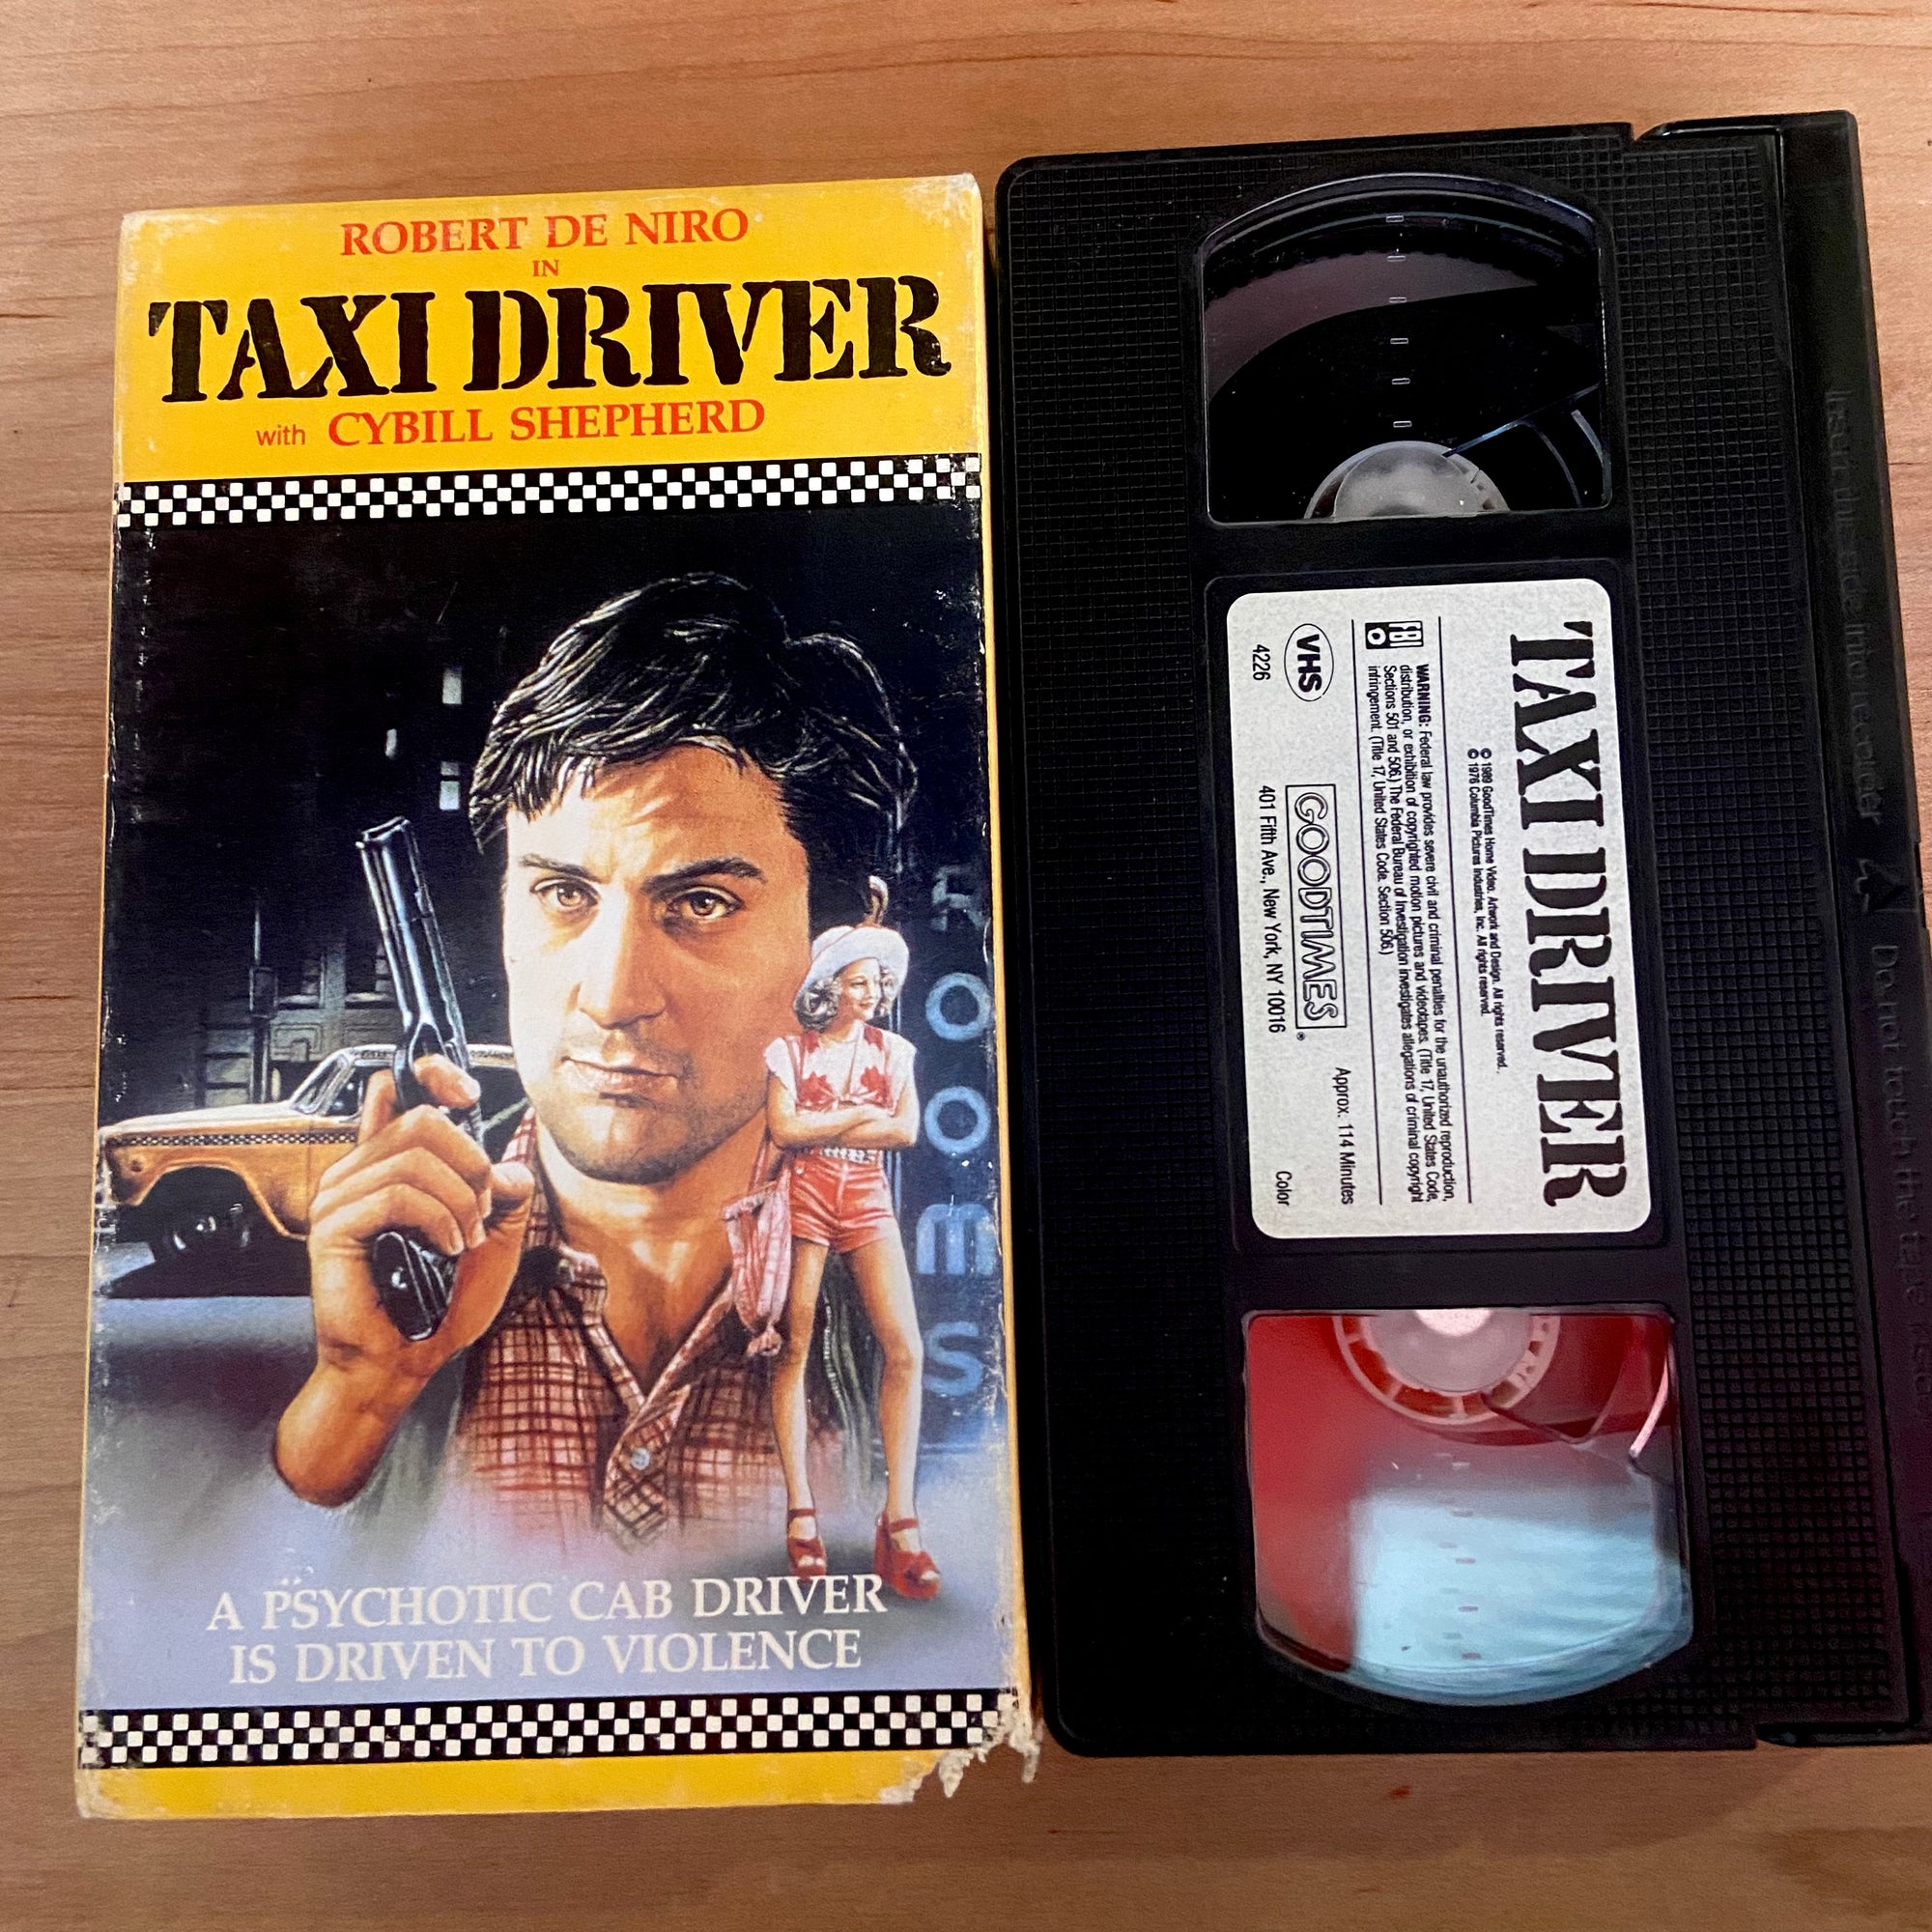 Taxi driver- VHS Tape (Used)